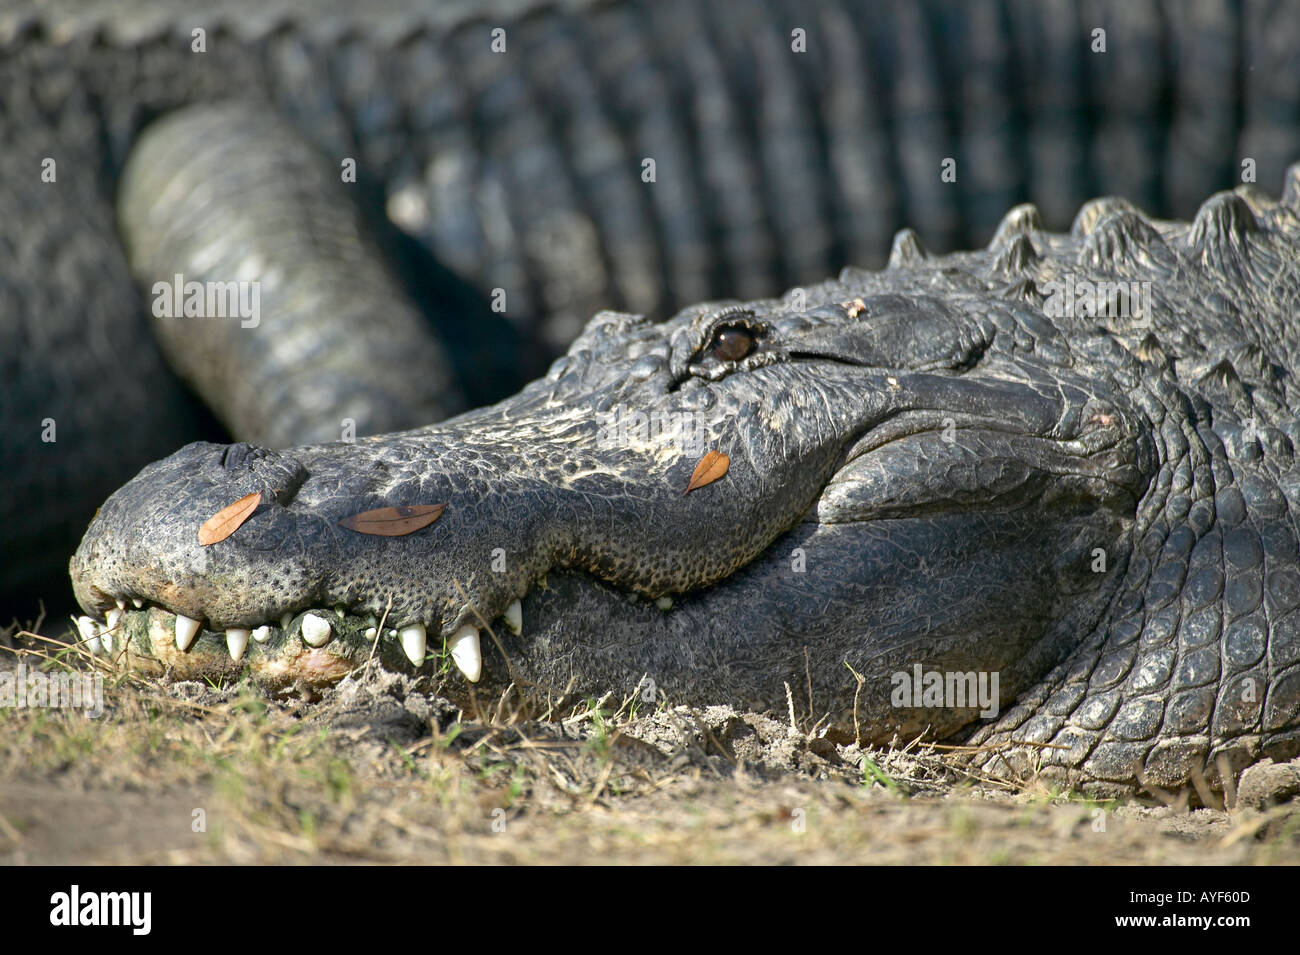 Profile of Alligator head snout and teeth with fallen oak leaves on it Stock Photo